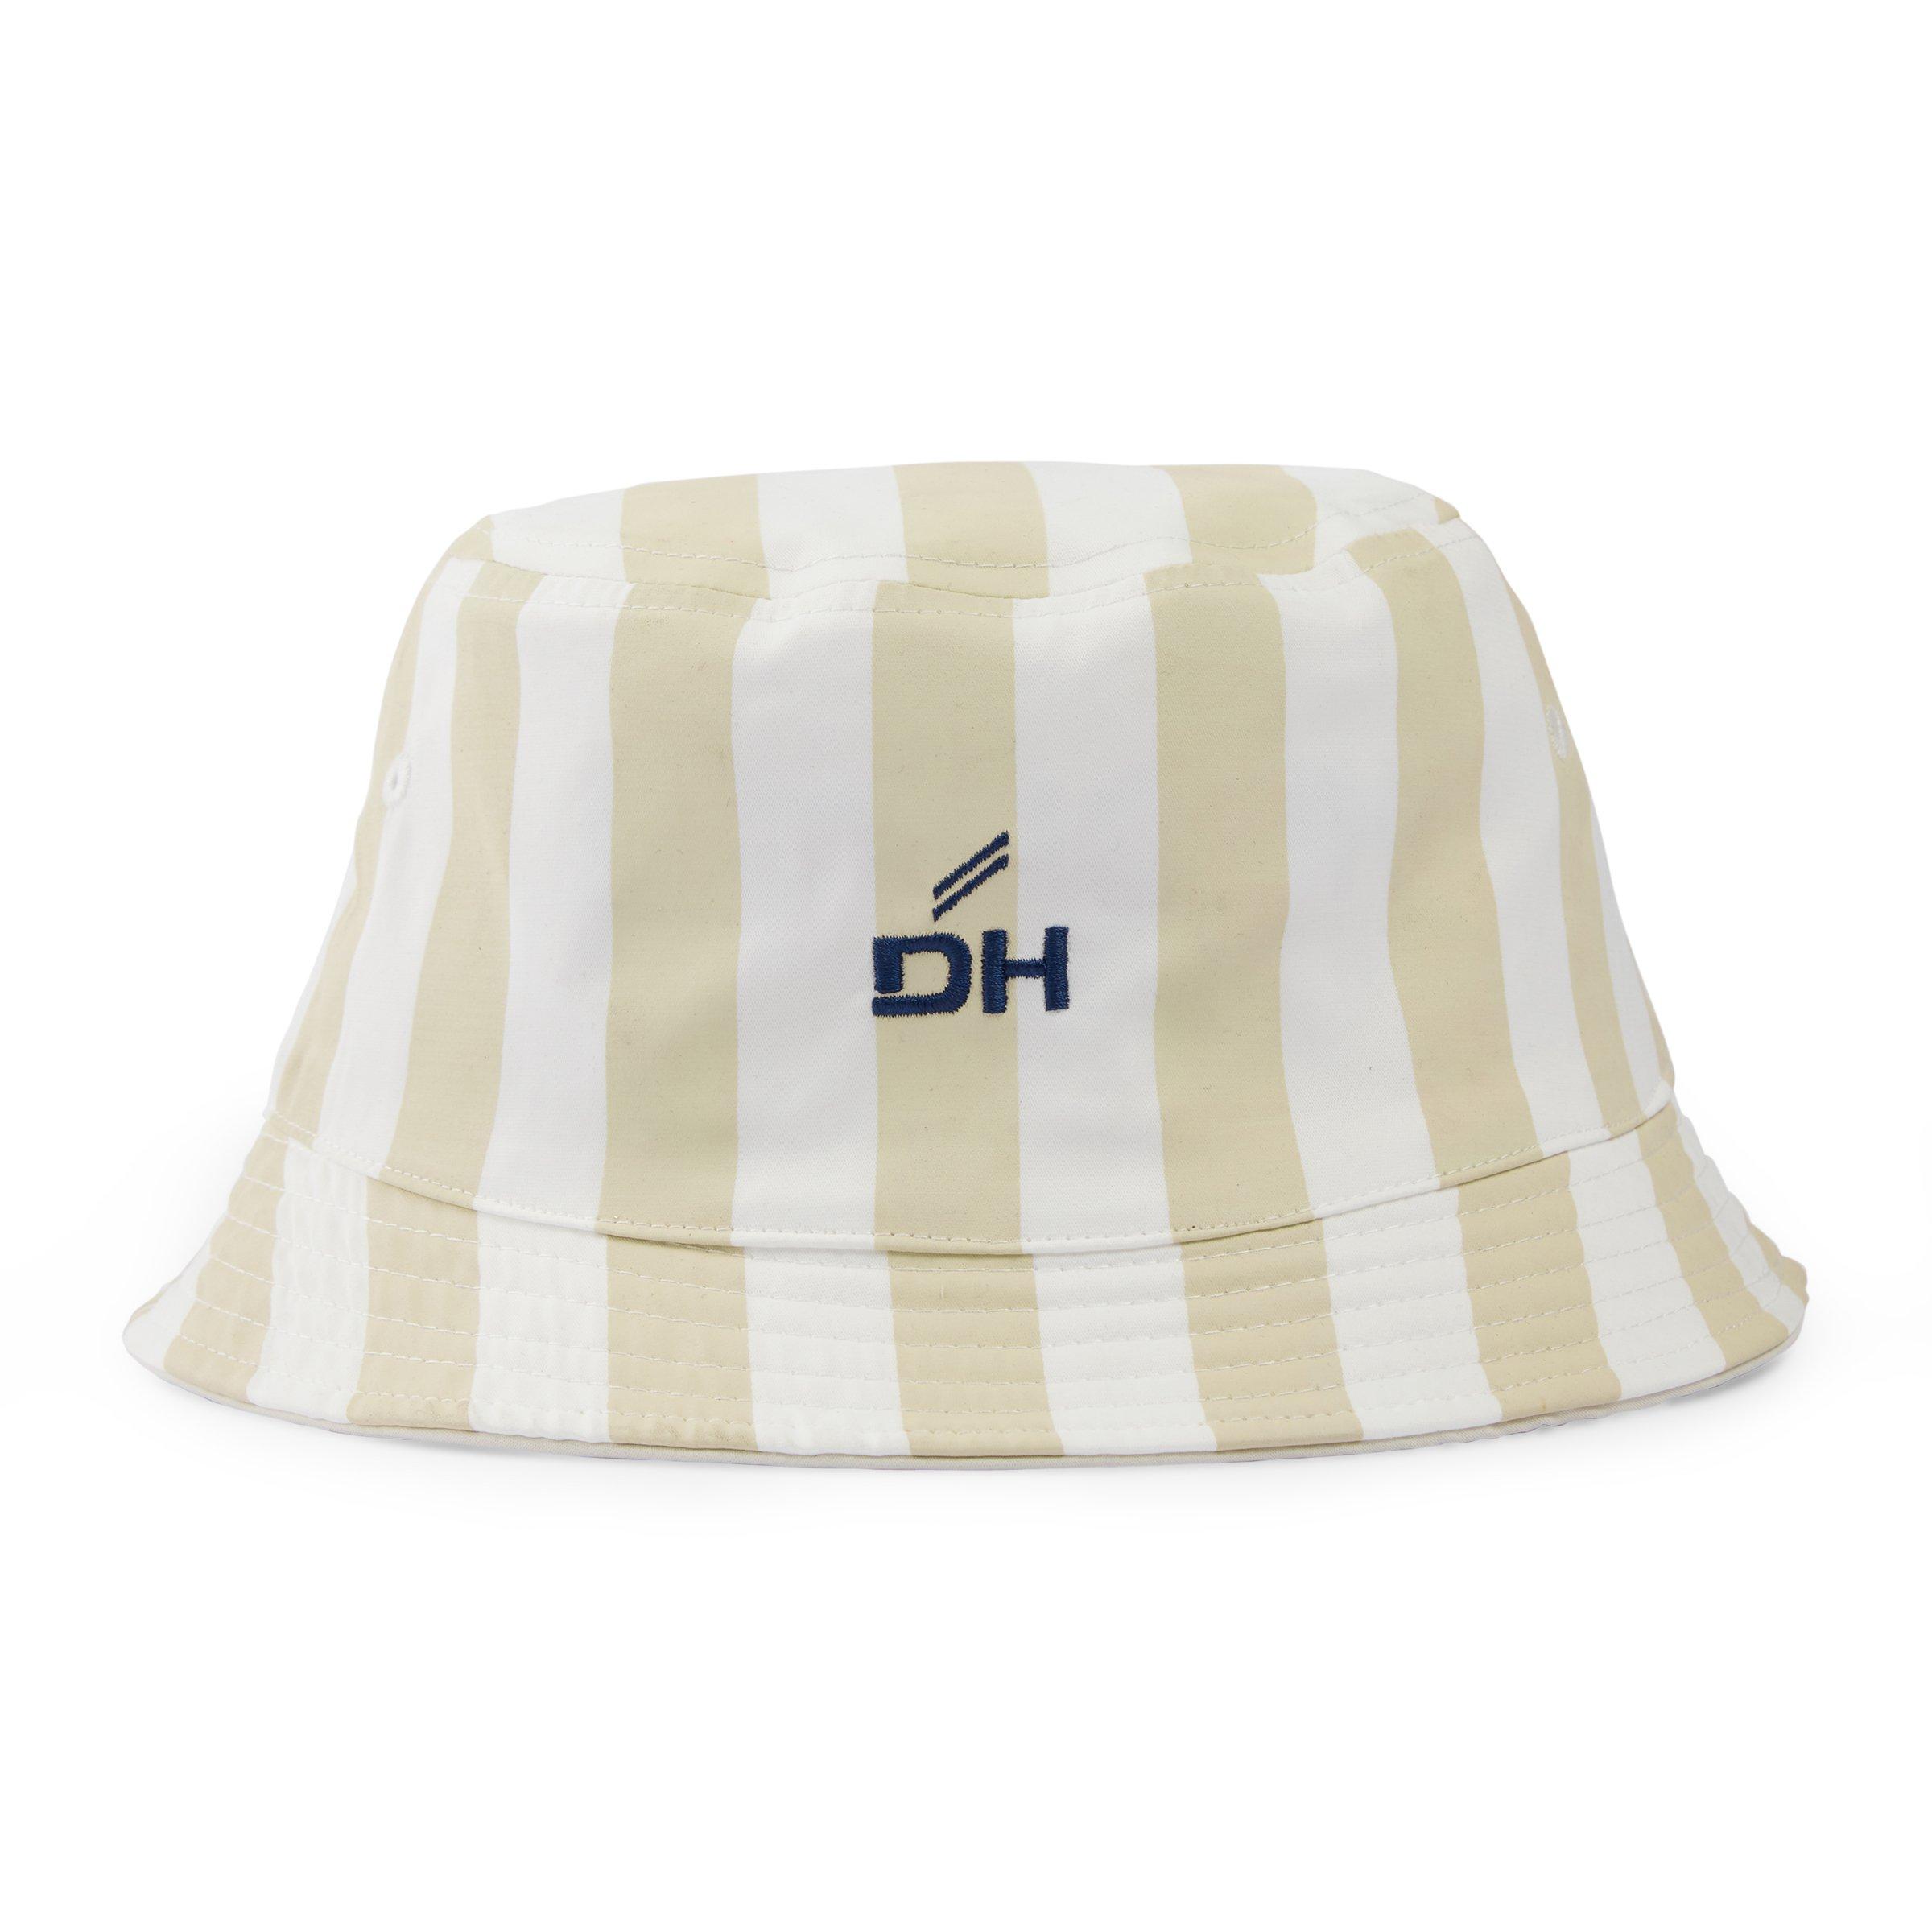 Best Of: Stylish, Sun-blocking Bucket Hats From Our Pro, 43% OFF